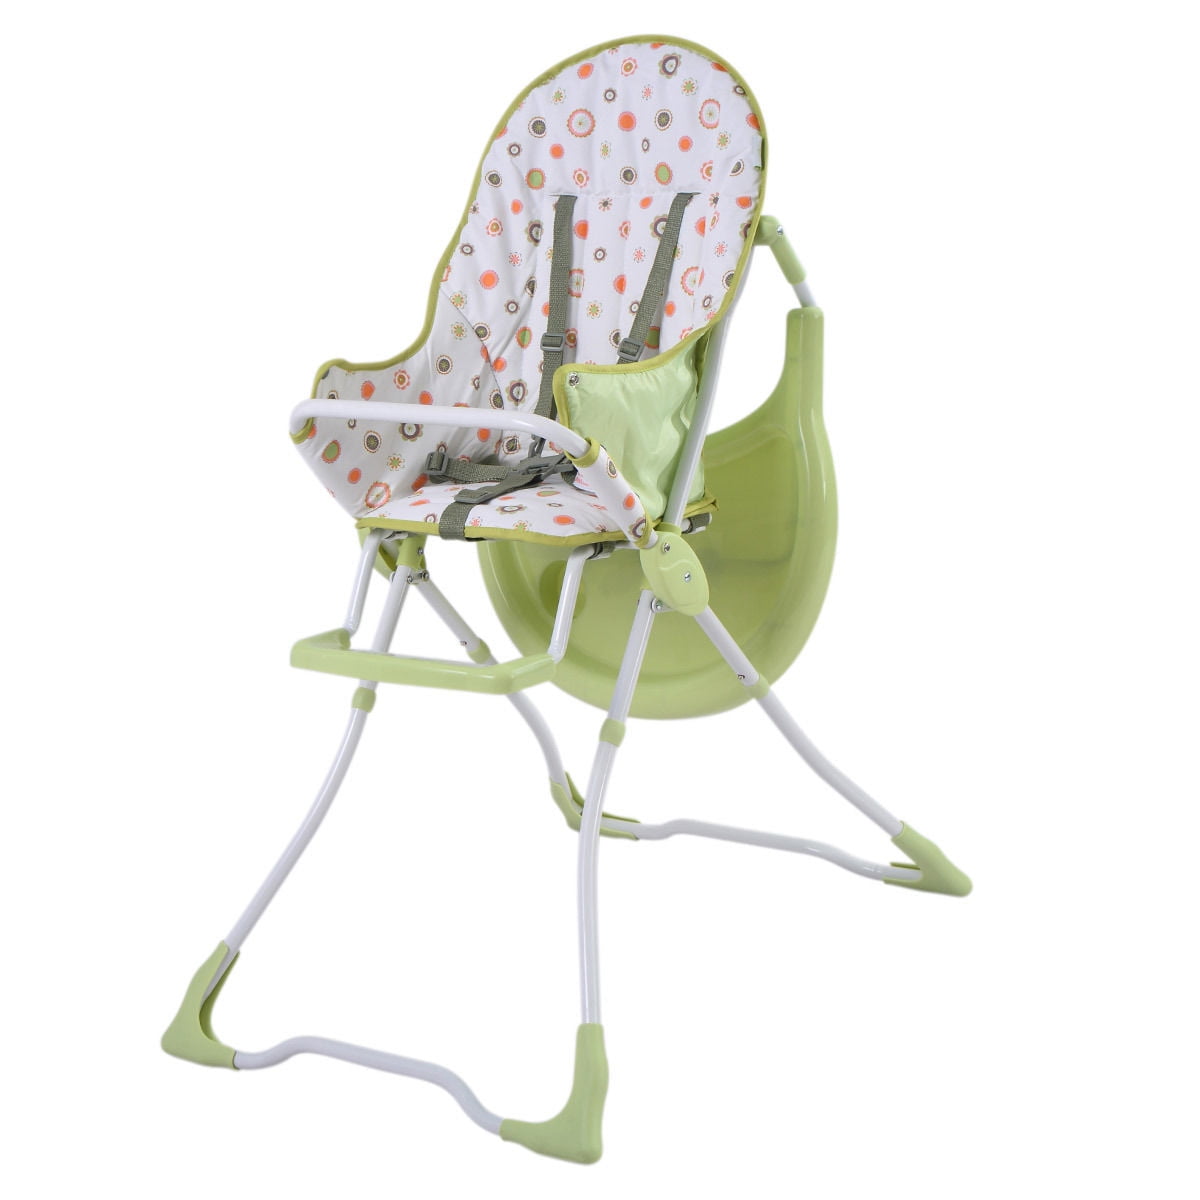  Baby  Portable High Chair  Infant Toddler Feeding Booster  